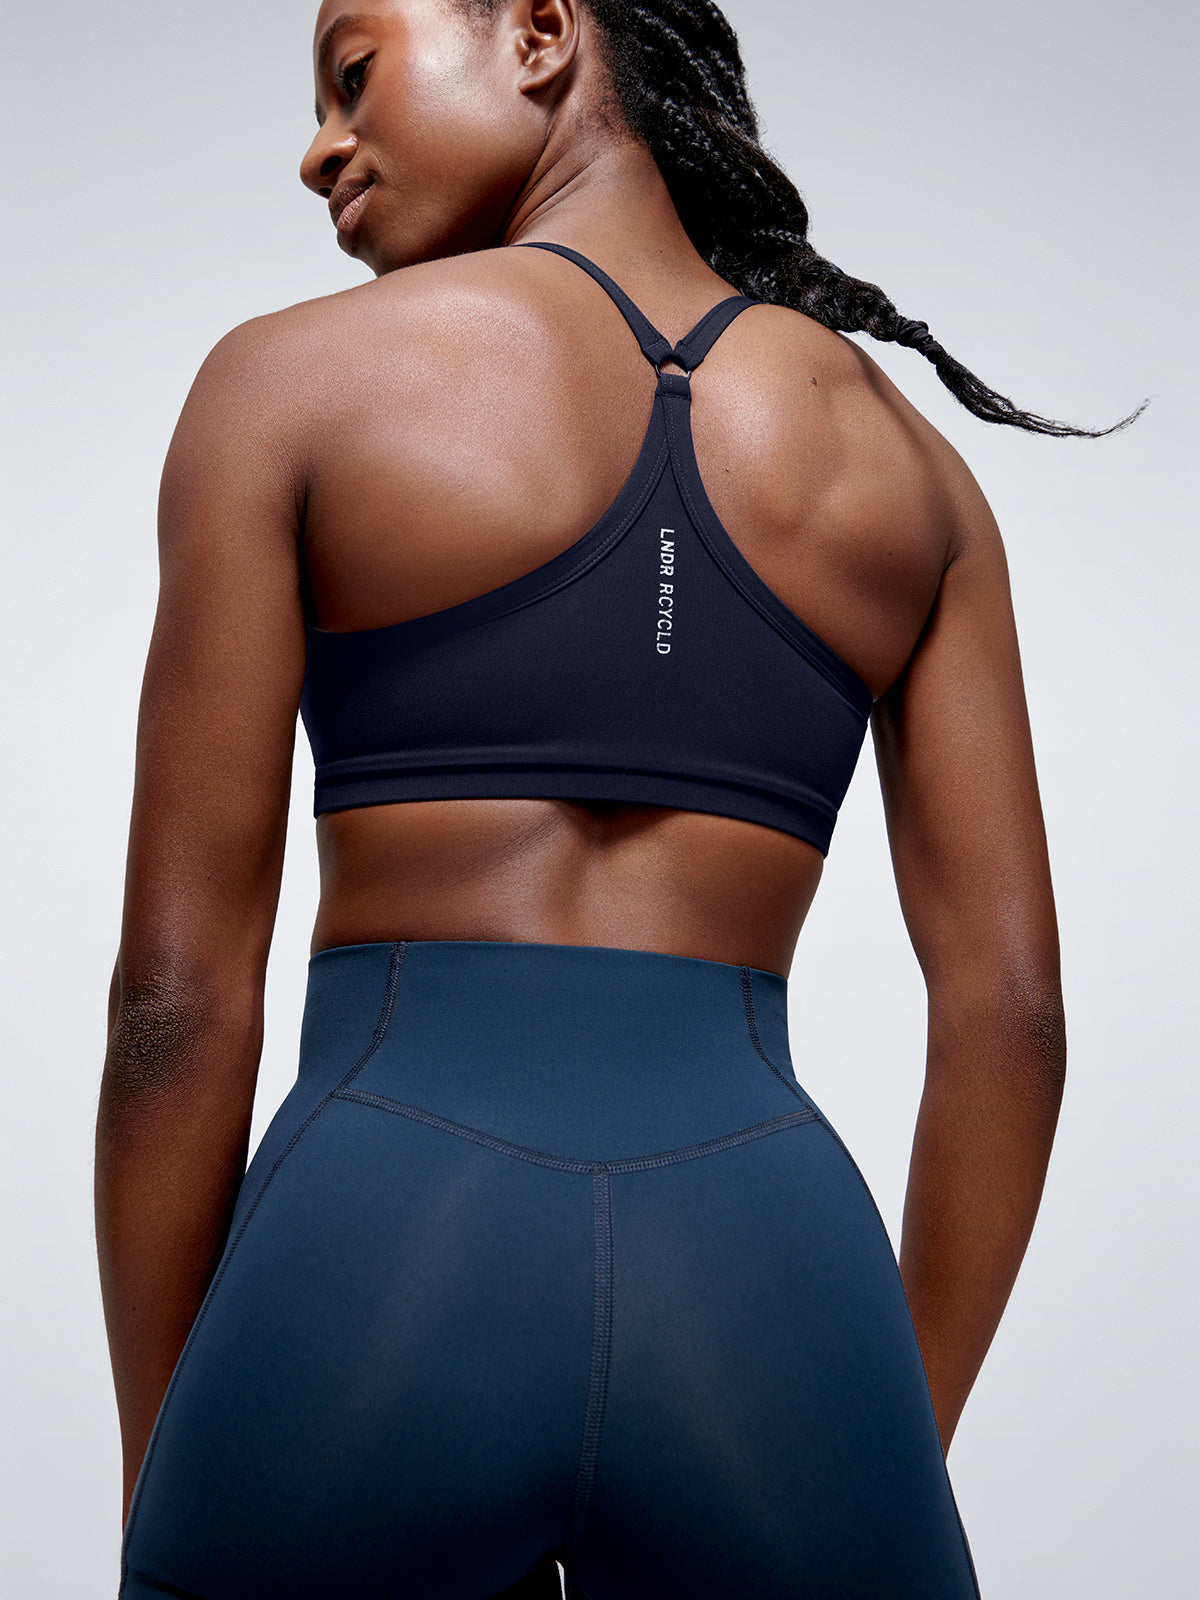 Womens fatal attraction padded navy blue sports bra 2